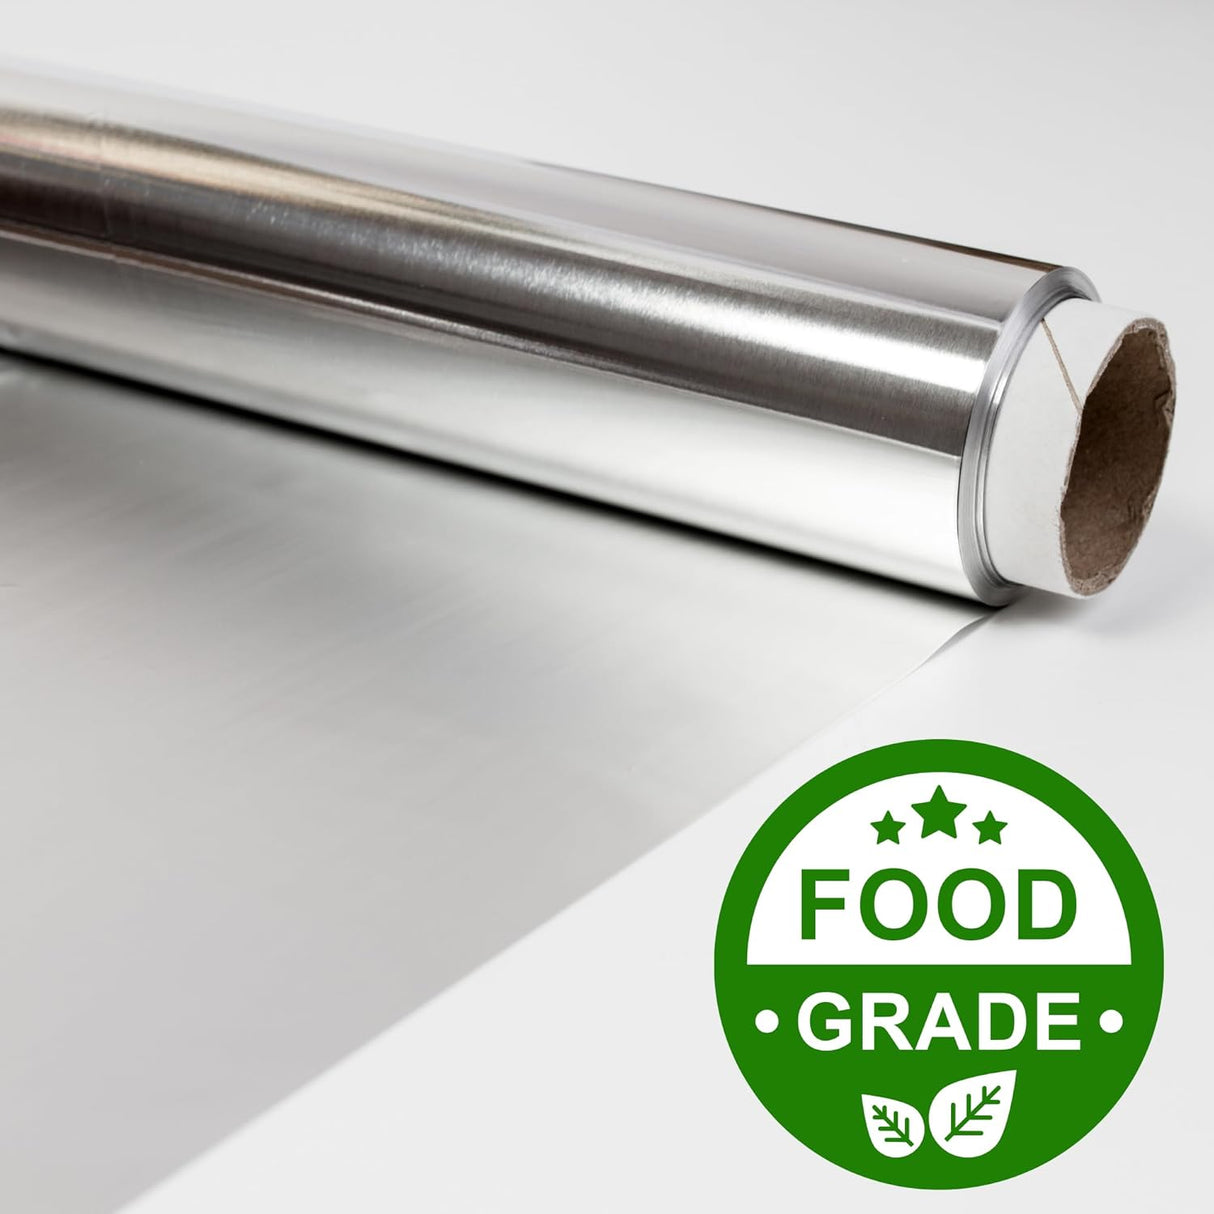 Singhal Aluminum Foil 9 Meters, 11microns | Aluminium Silver Foil for Kitchen, Food Packing, Wrapping, Storing and Serving Pack of 1